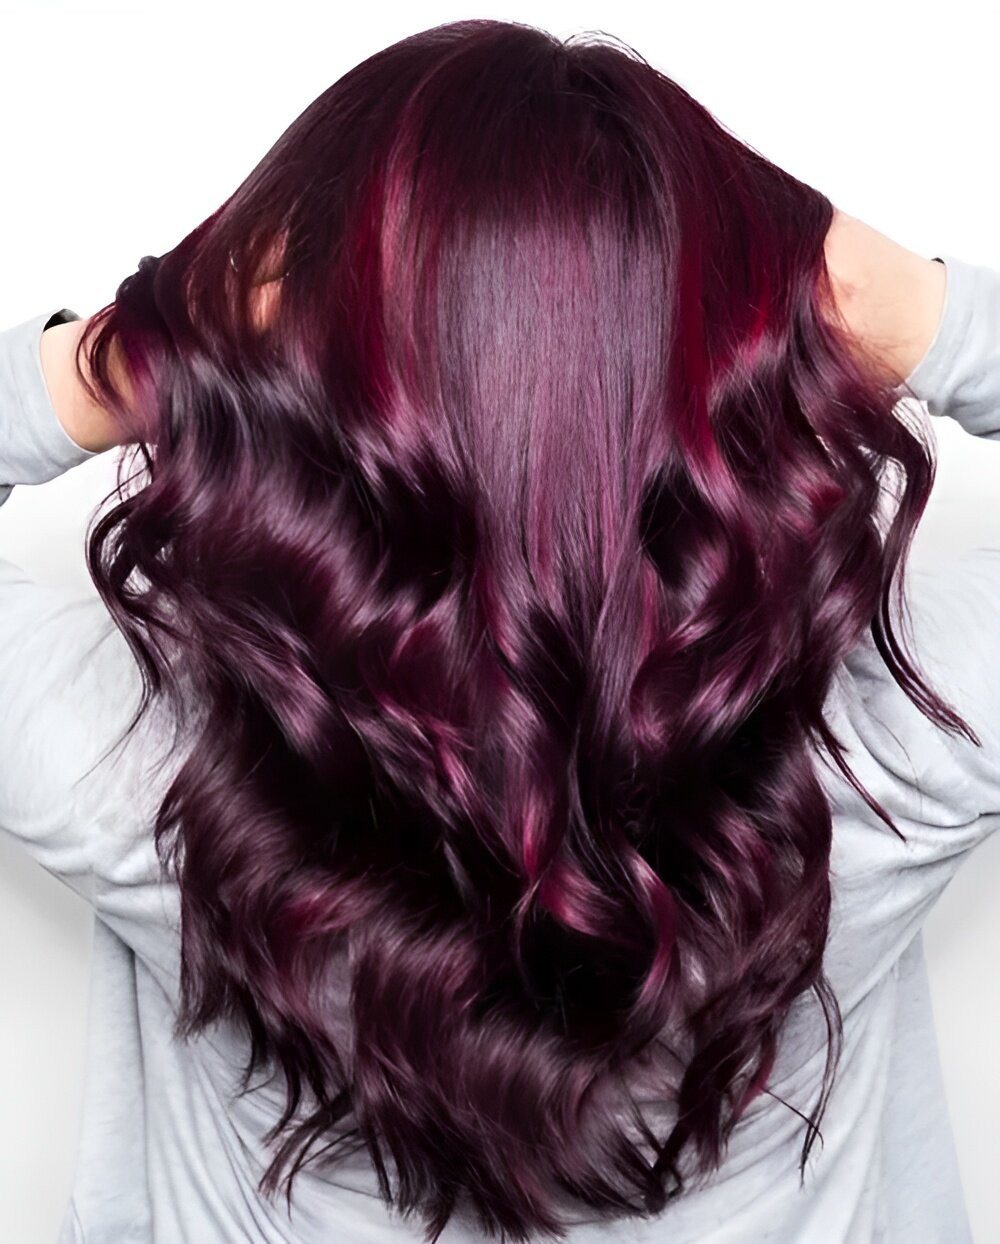 Become A Model With These 27 Gorgeous Plum Hair Color Ideas - 205